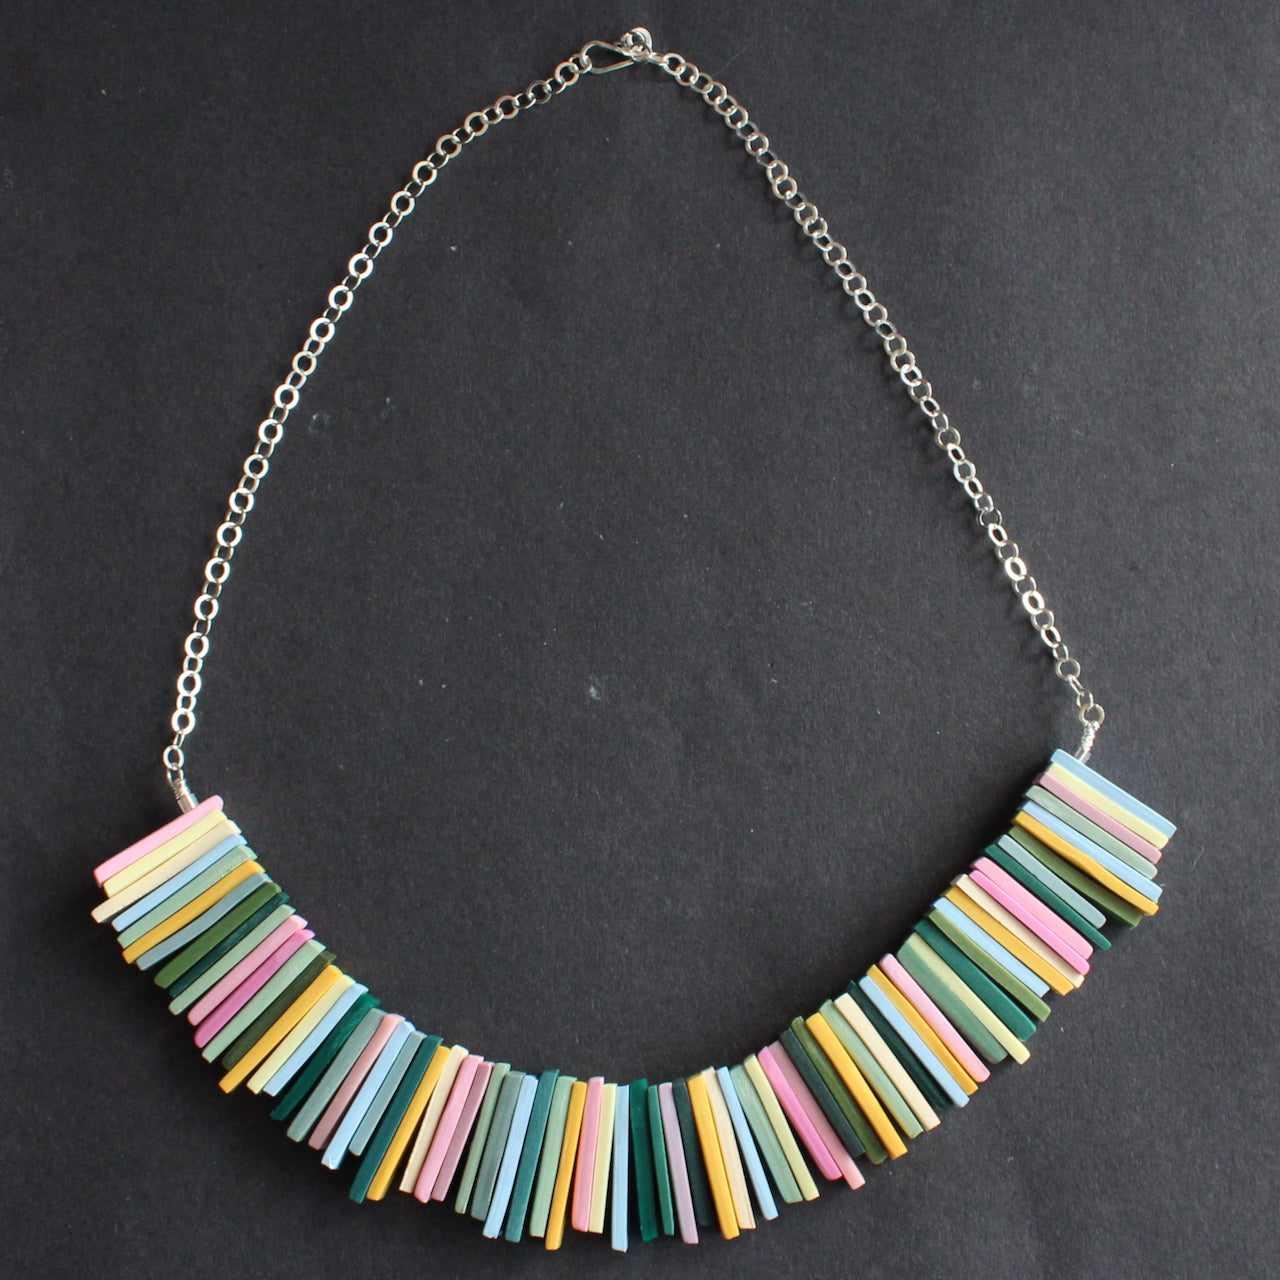  a necklace in pinks, yellow and green oblong beads by UK  jeweller Clare Lloyd 